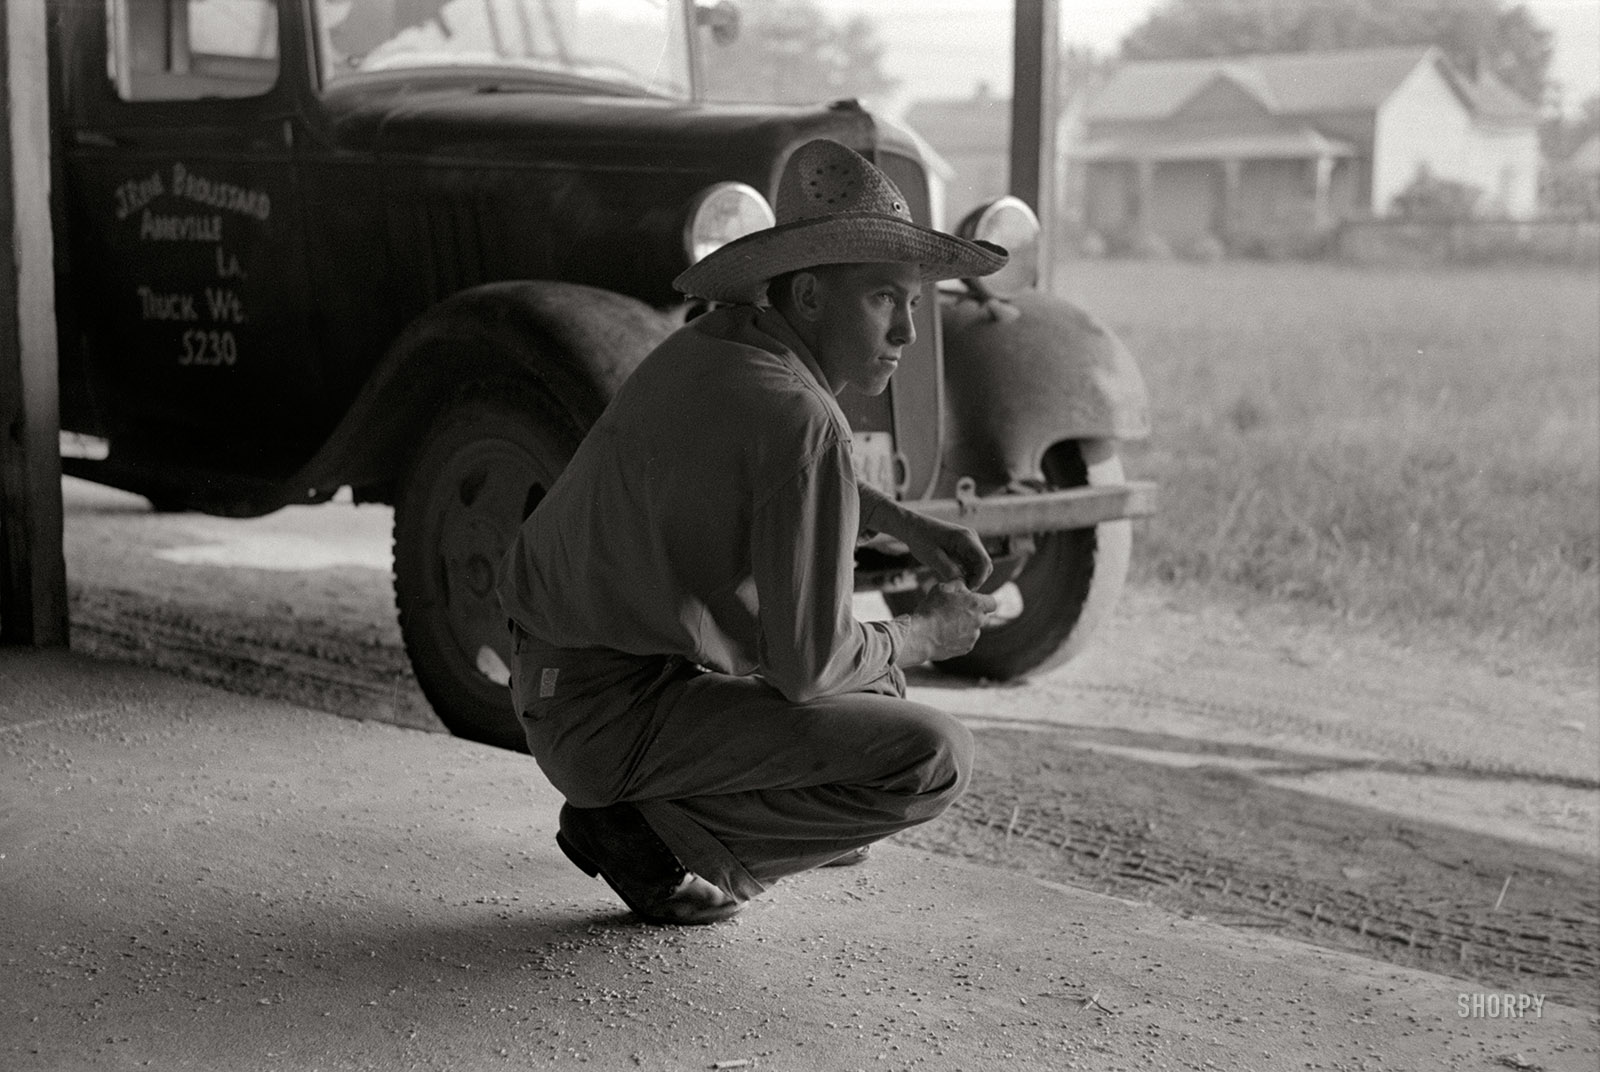 September 1938. Abbeville, Louisiana. "Farmer's truck at state rice mill." 35mm negative by Russell Lee for the Farm Security Administration. View full size.